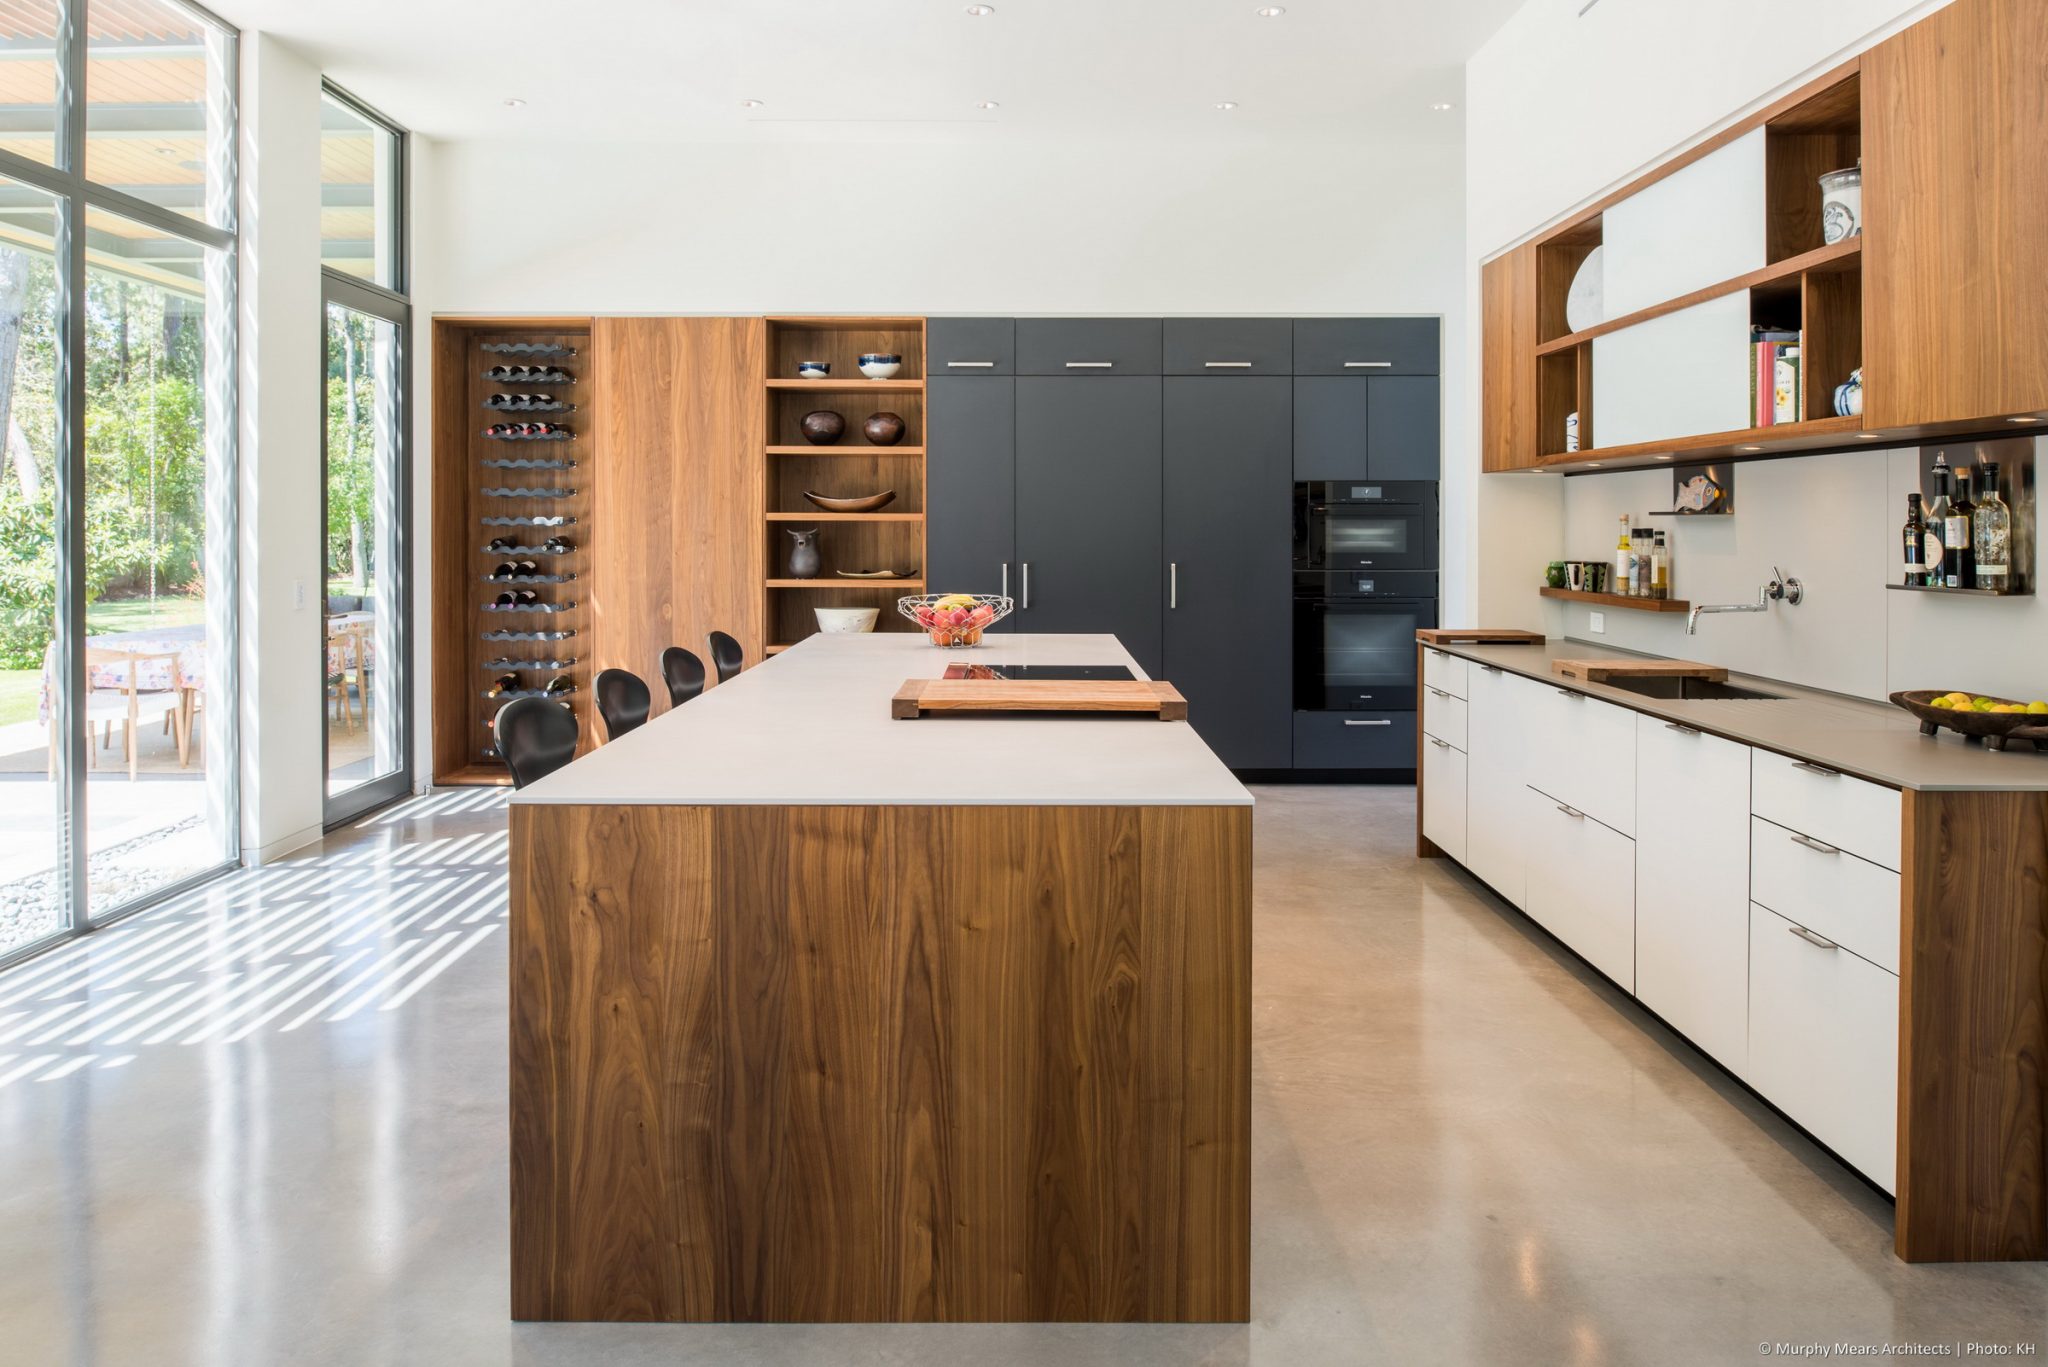 Carlton Woods Residence - A central island and two storage walls arranged for open flow through the kitchen and generous views of the backyard space.